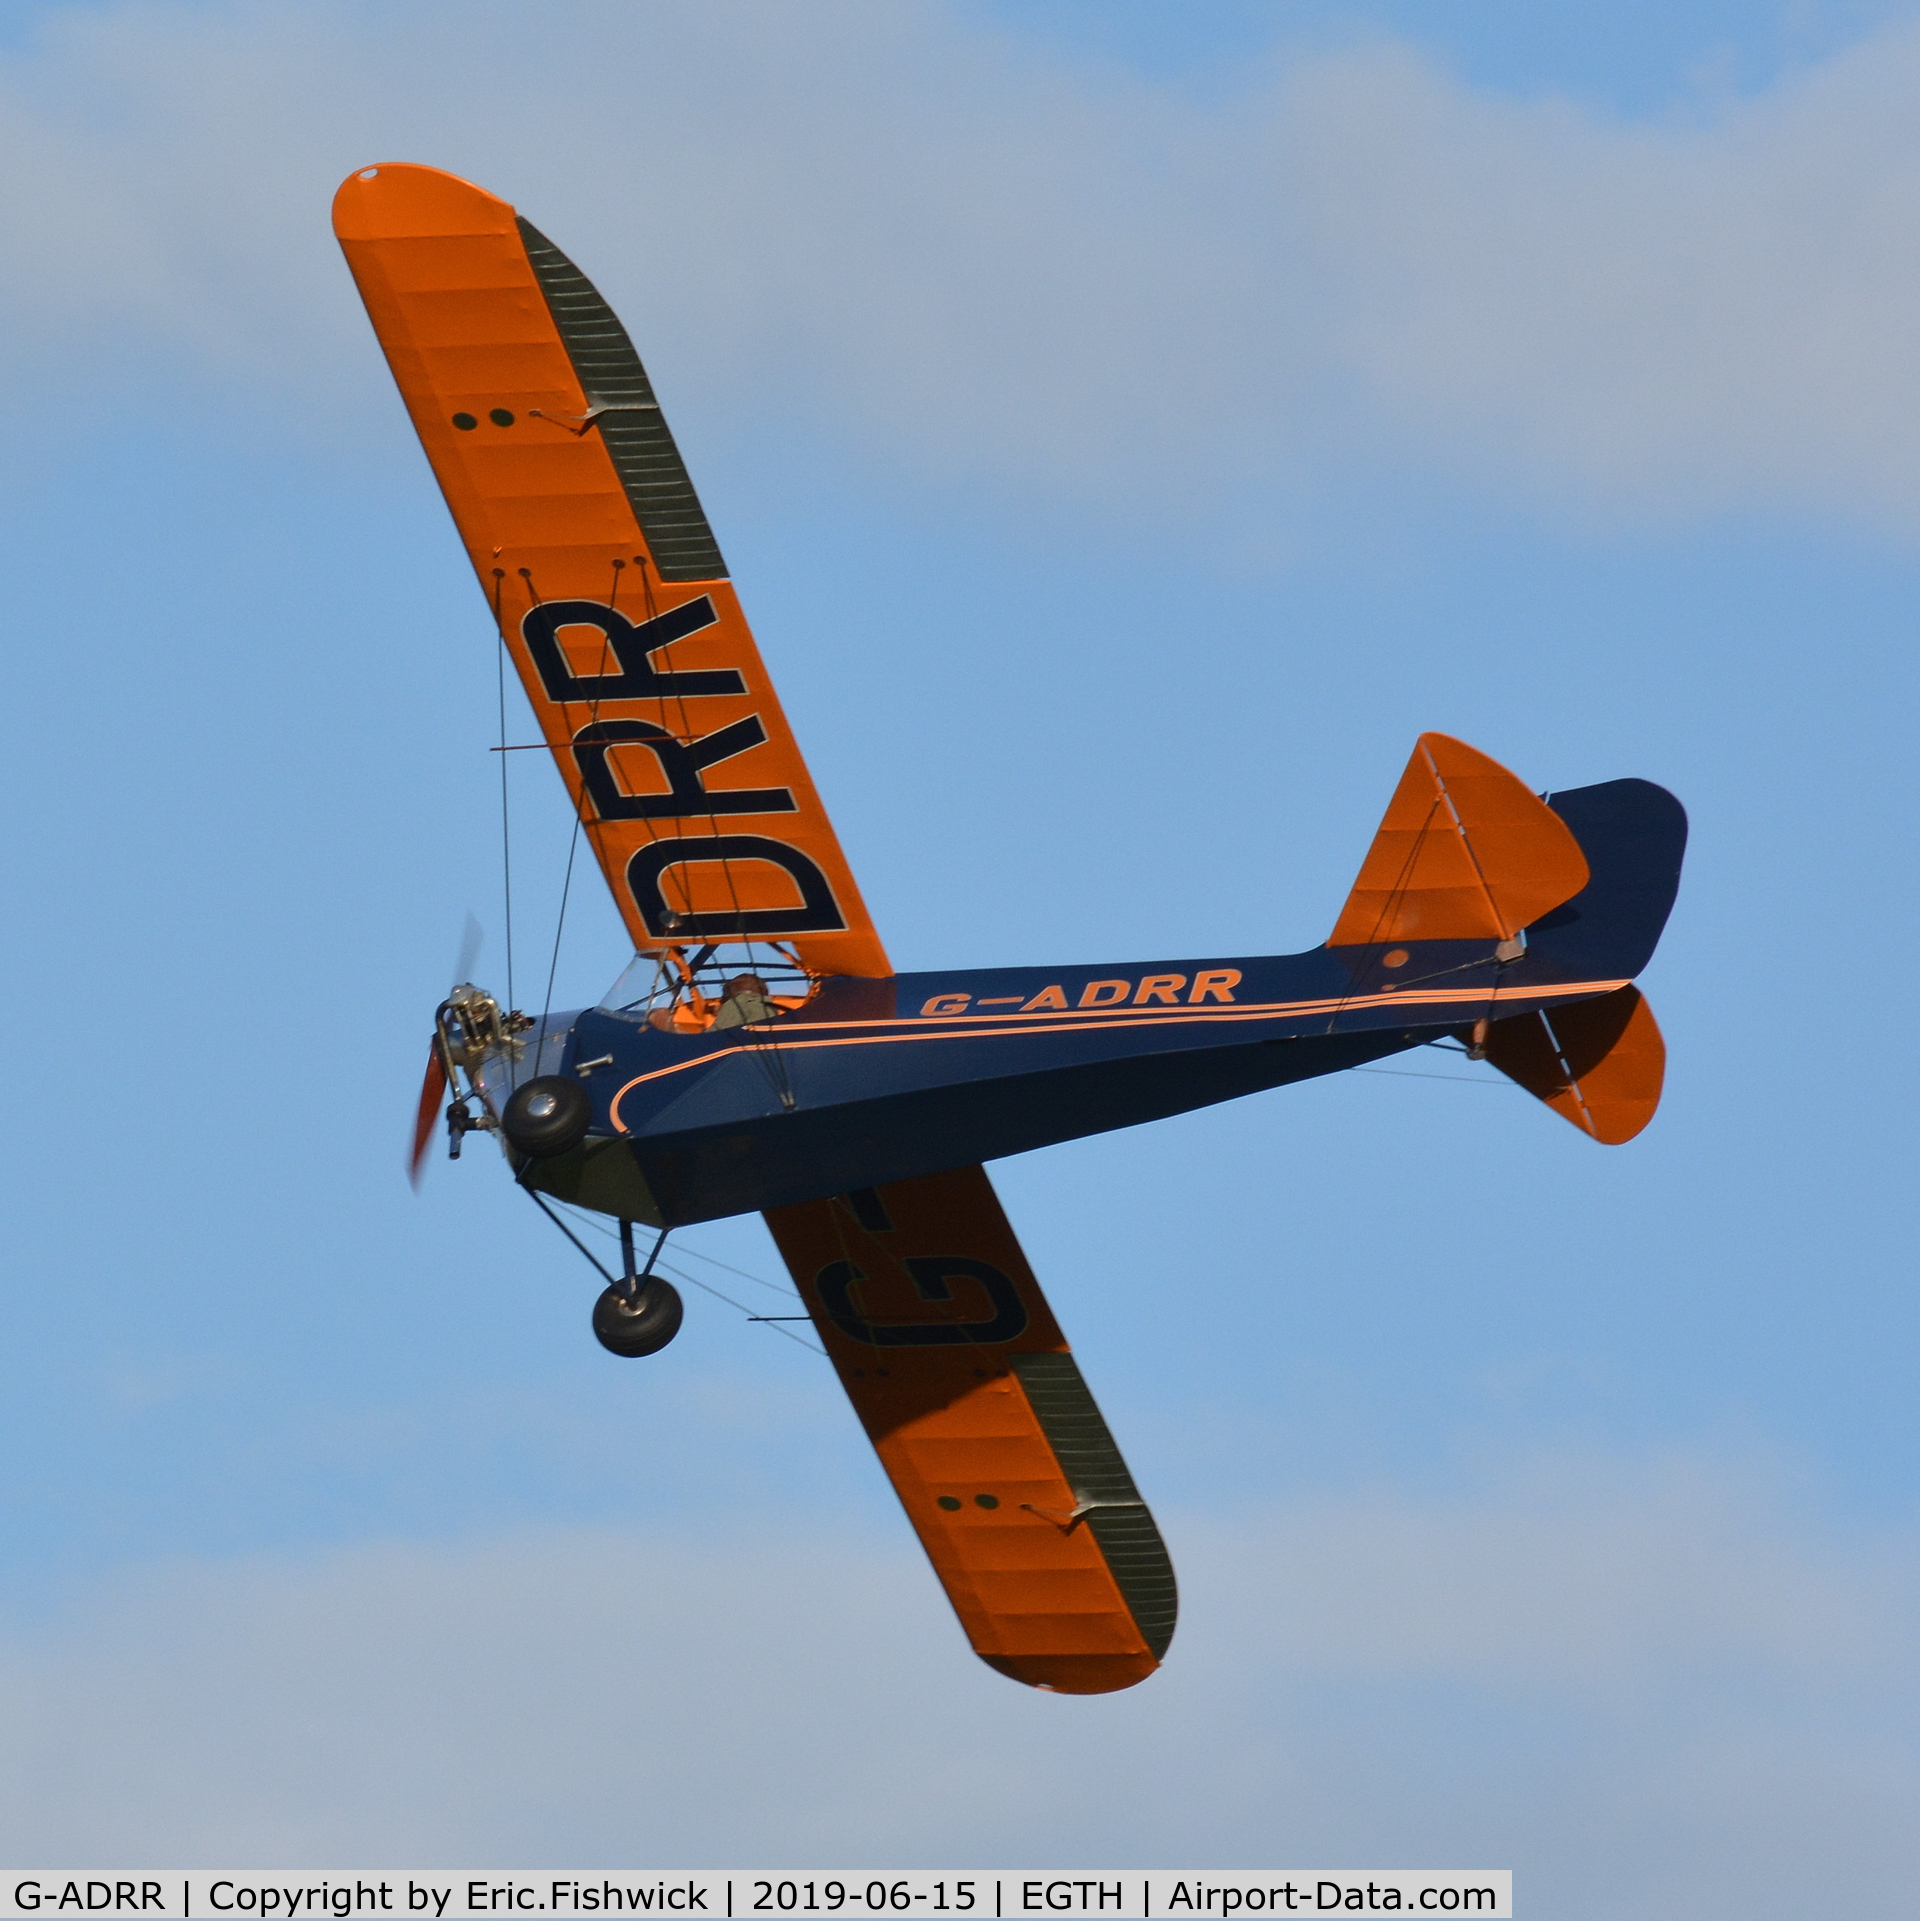 G-ADRR, 1936 Aeronca C-3 Collegian C/N A-734, 44. G-ADRR making a welcome appearance at The Evening Airshow at The Shuttleworth Collection, June, 2019.